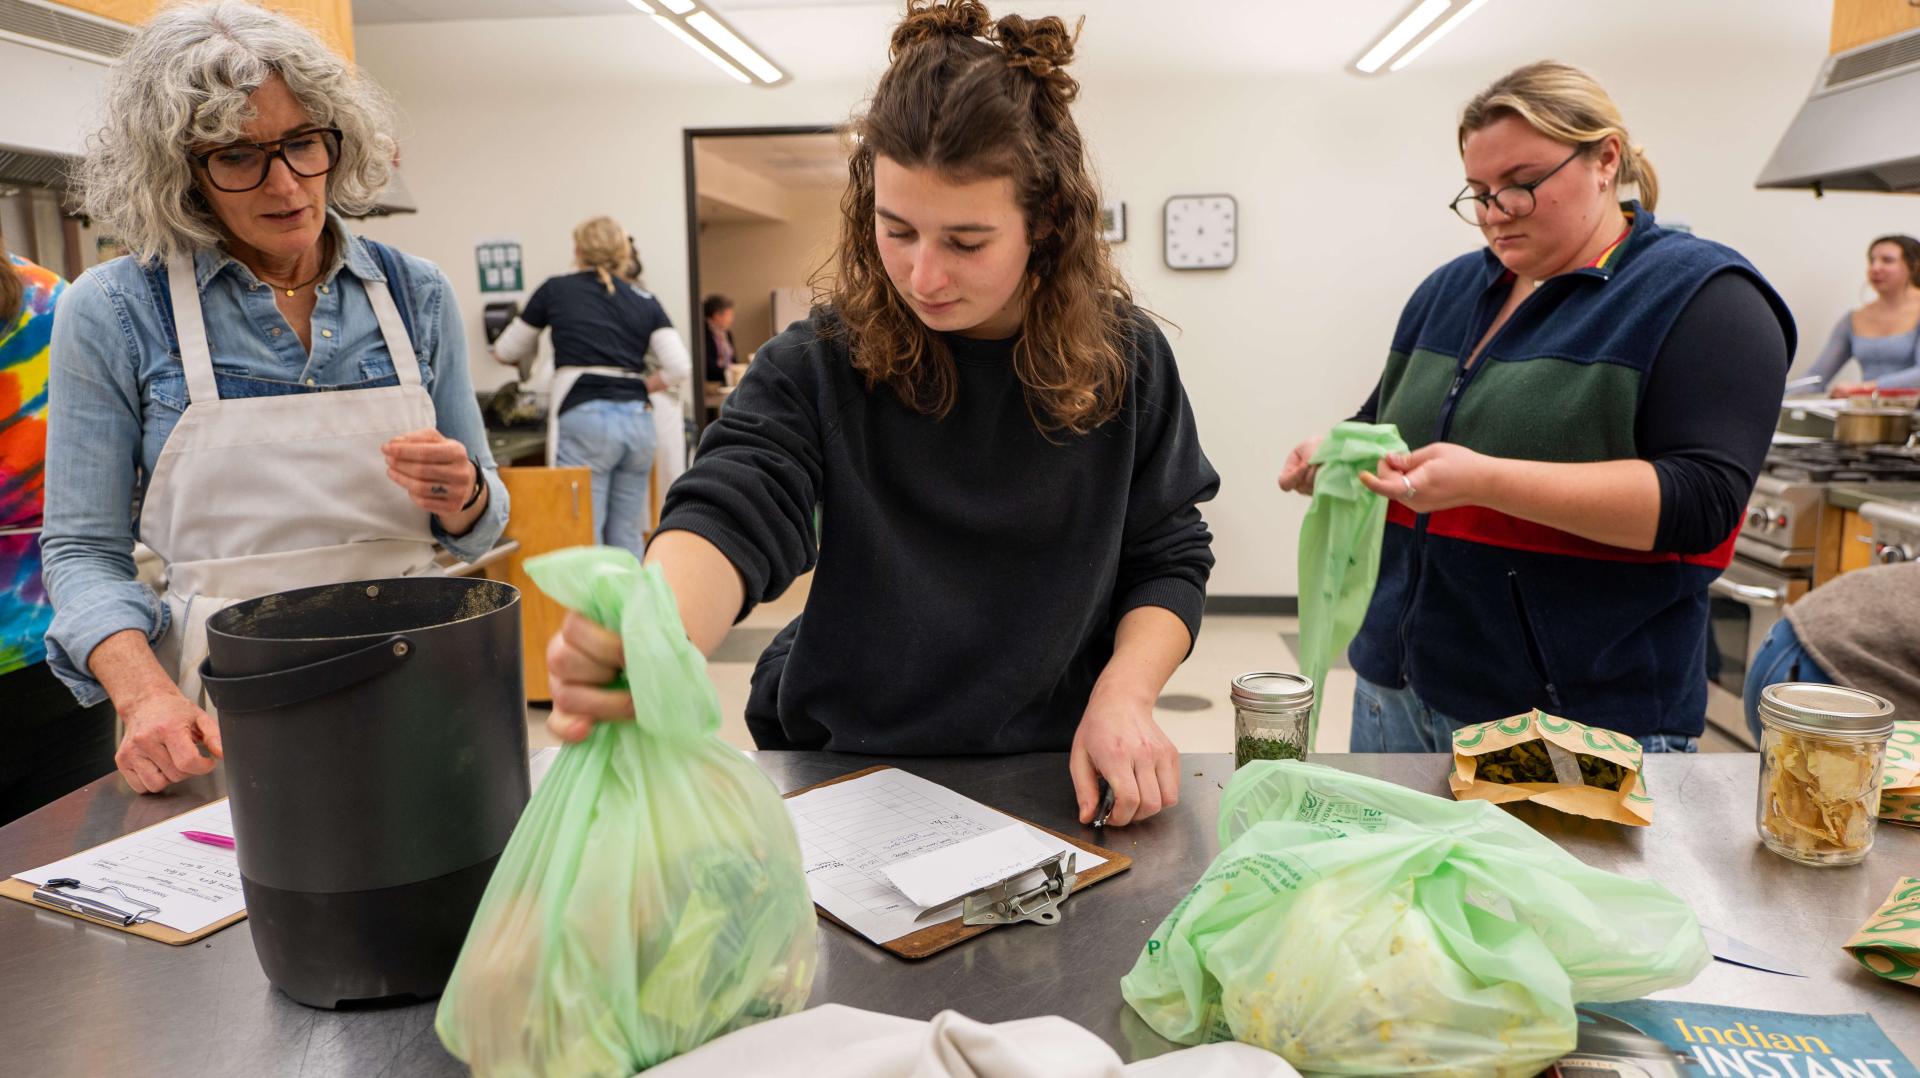 Researchers weighing bags of food waste